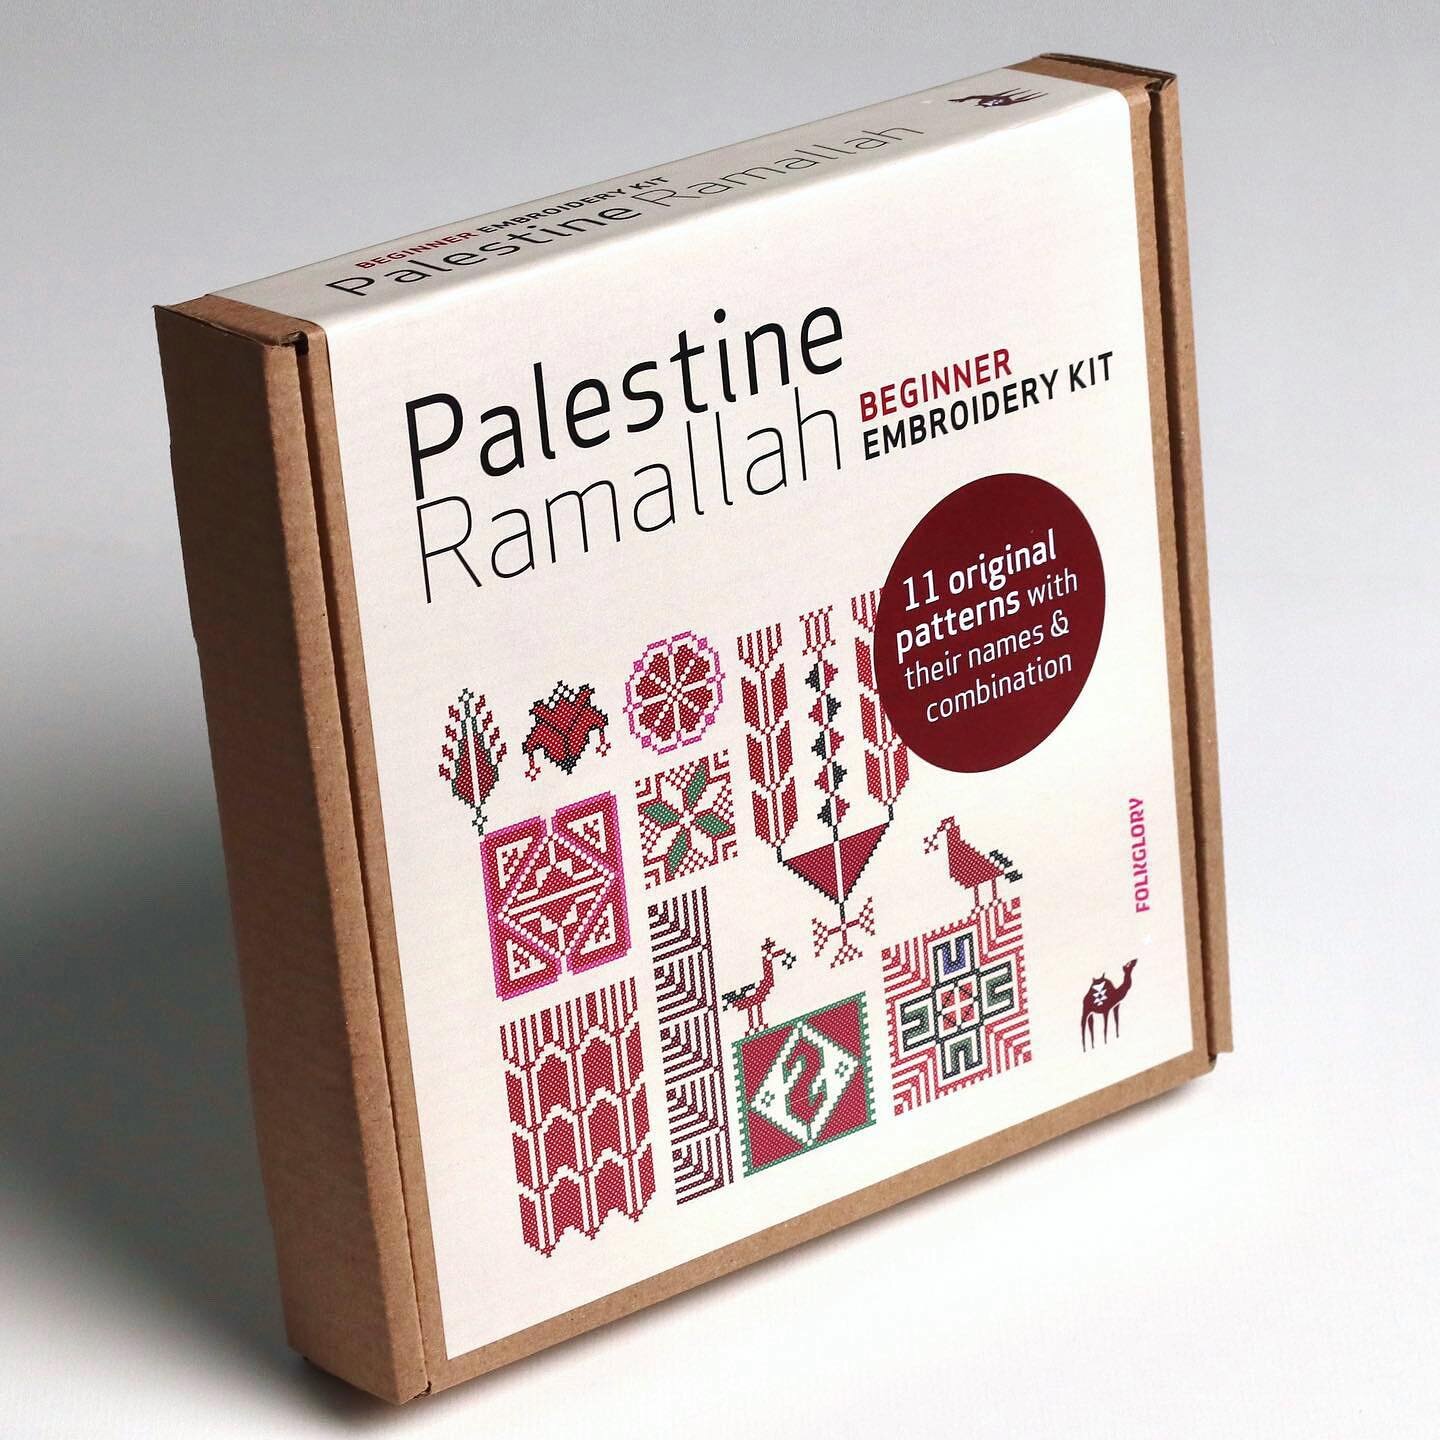 Our family of #embroidery kits keeps growing, with more to come this year. Our kits are based on original research of heritage dresses from #Palestine, #Jordan and #Syria. Each kits comes with everything you need to start your embroidery journey and 